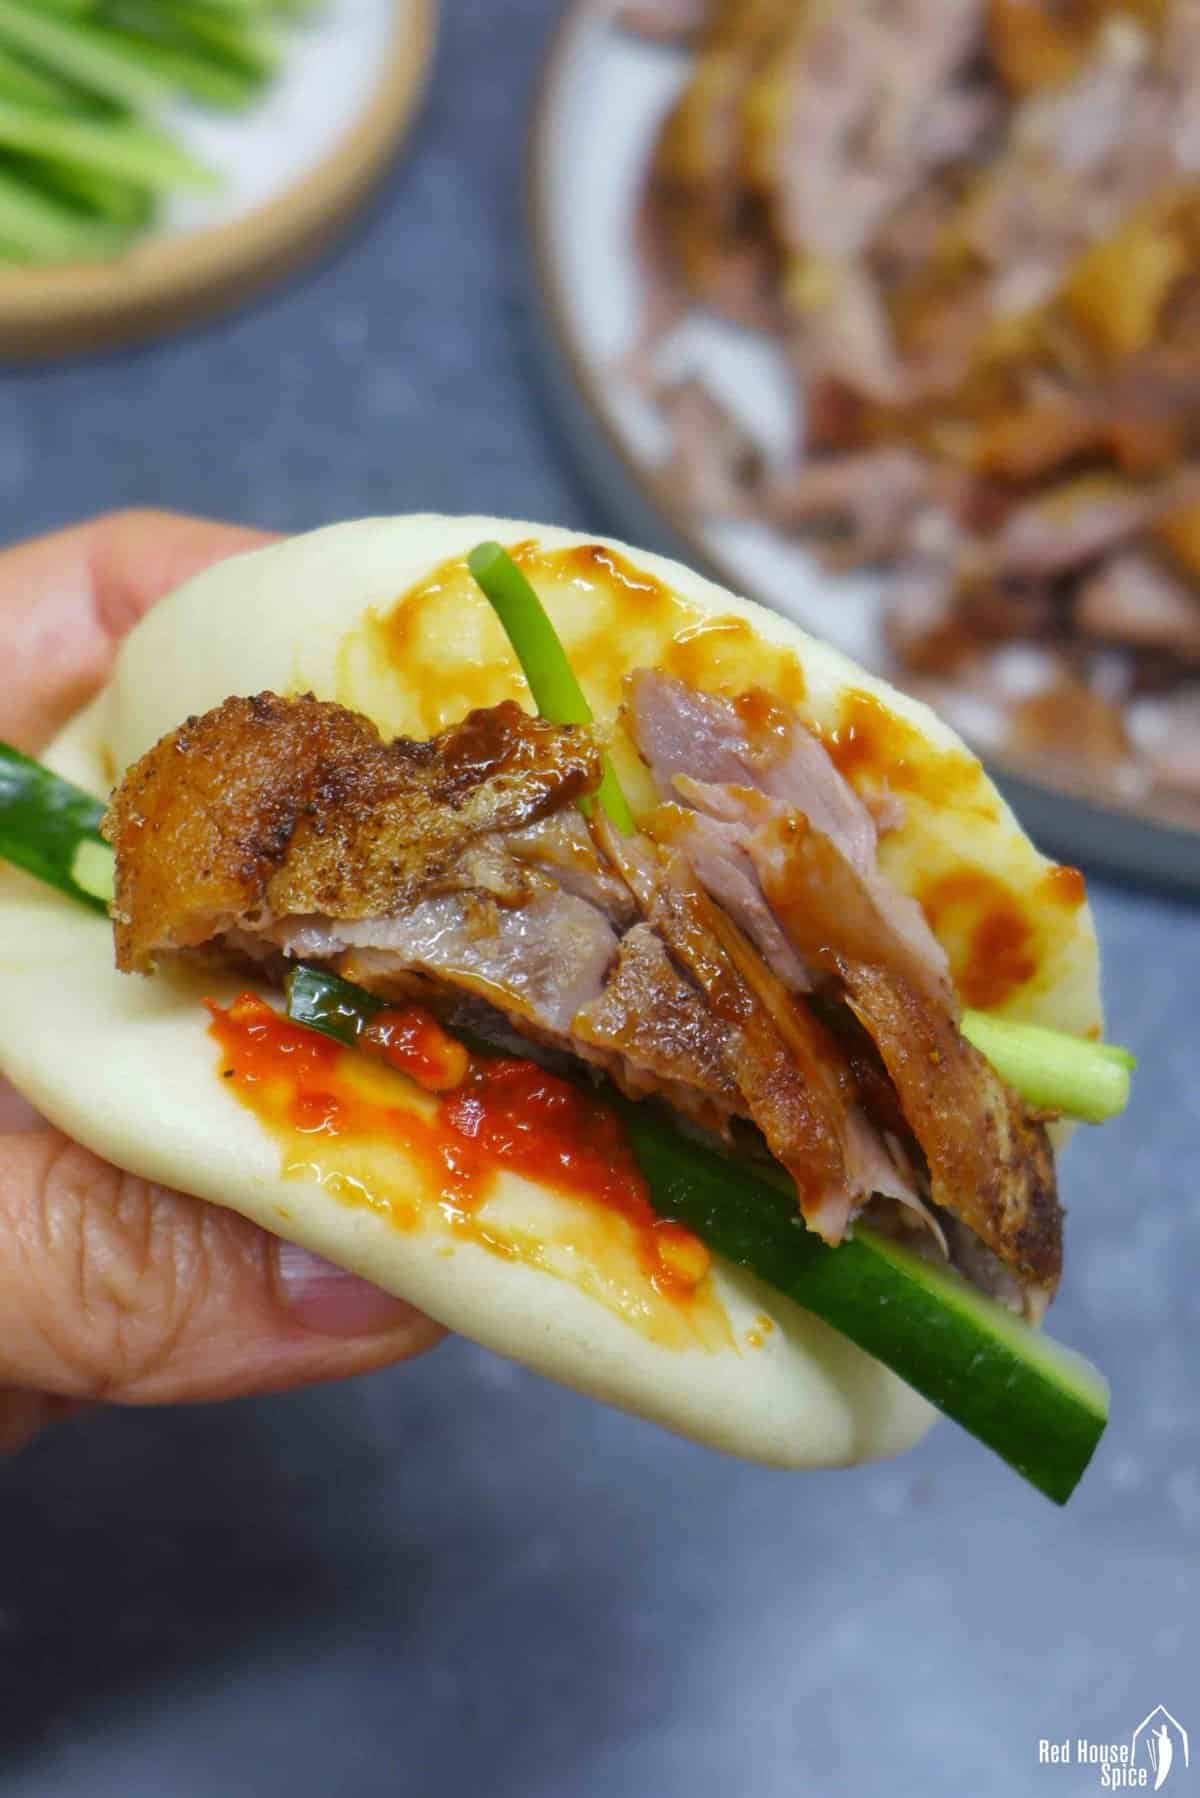 Aromatic crispy duck wrapped with a steamed bao bun.